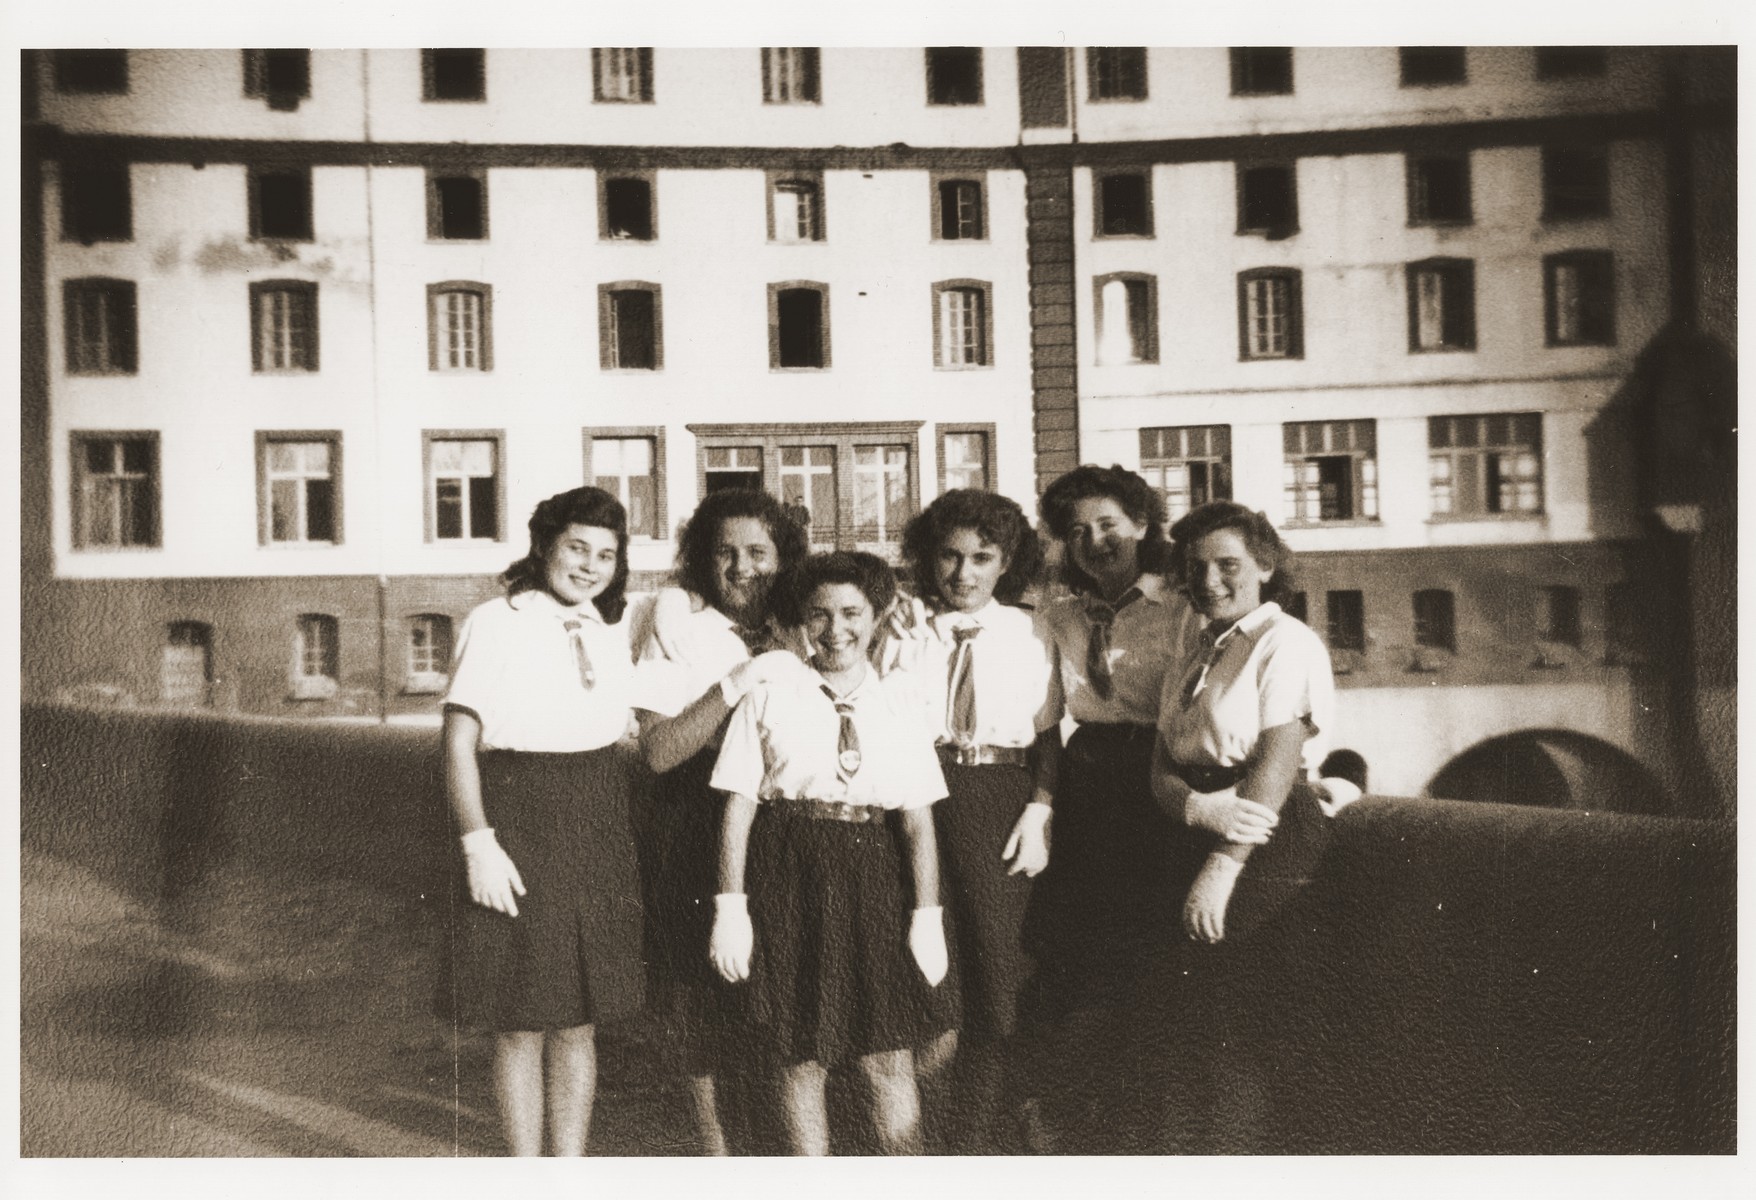 Group portrait of Jewish youth at the Hotel du Moulin in Moissac.  

The Hotel du Moulin residence for displaced Jewish youth was operated by the French-Jewish scouting movement, Eclaireurs Israelites de France.